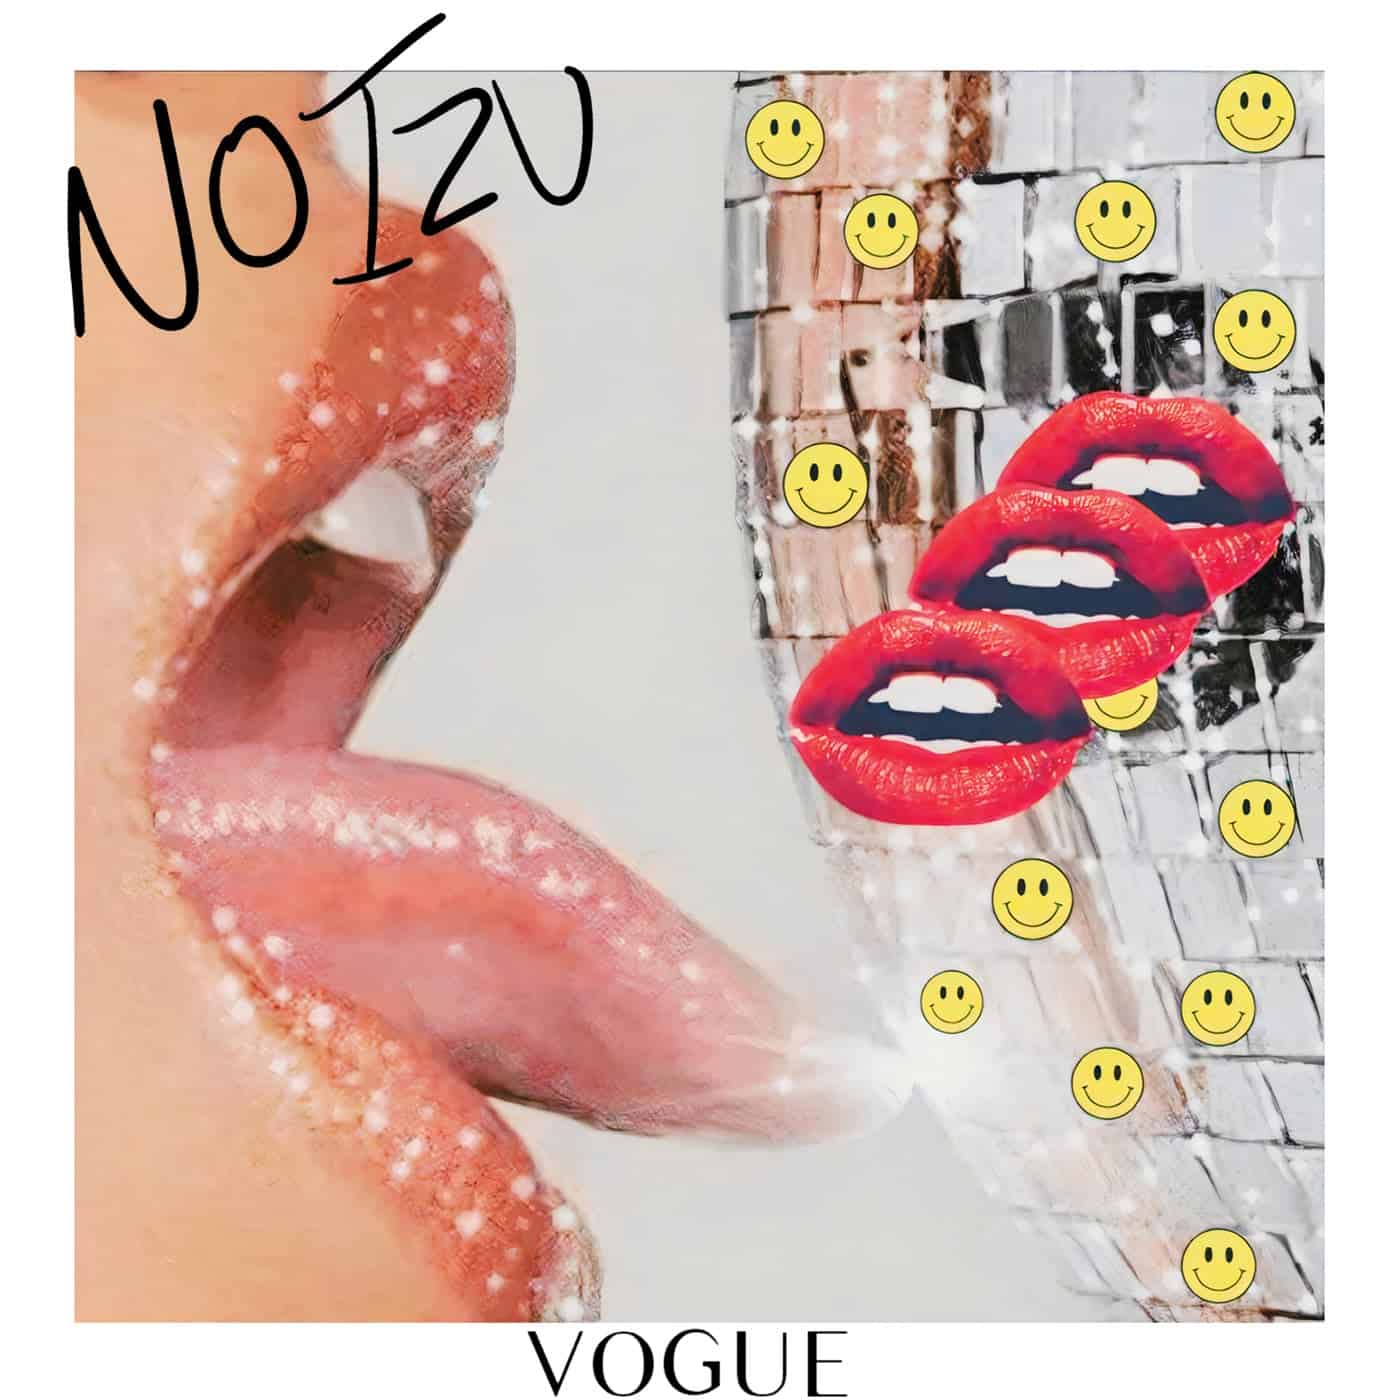 image cover: Vogue by Noizu on Techne